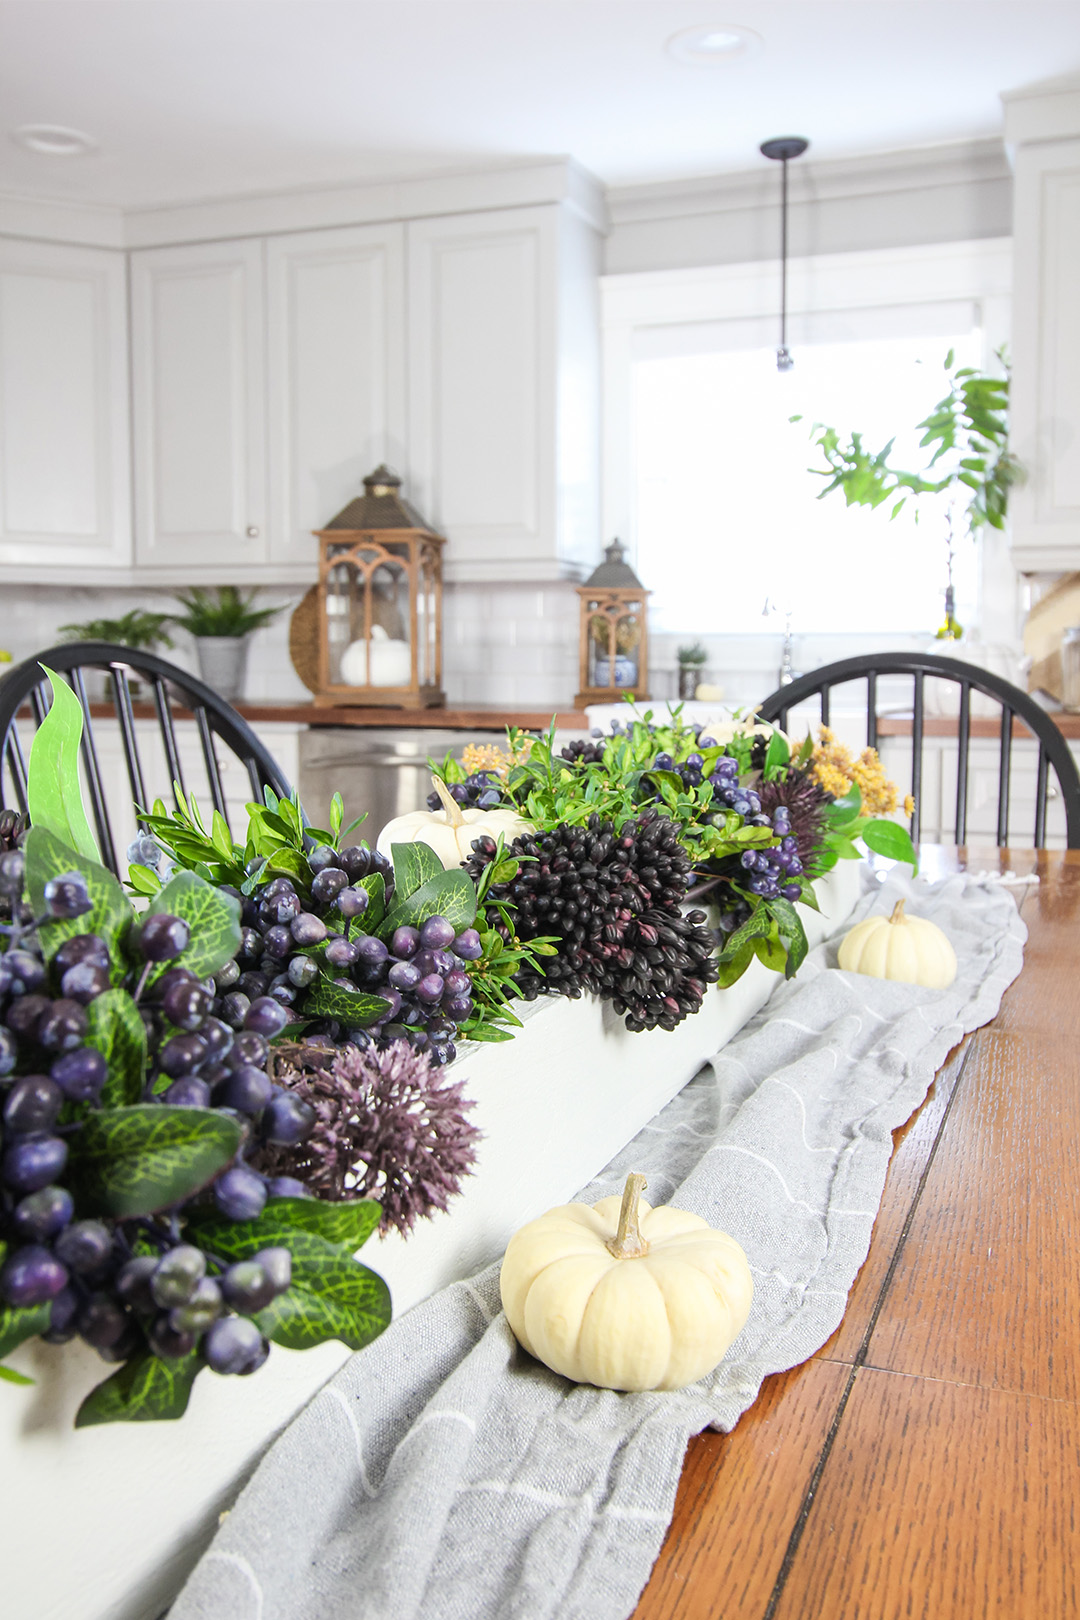 In this post I'll share details about our farmhouse style Thanksgiving table from our Canadian Thanksgiving holiday last weekend!